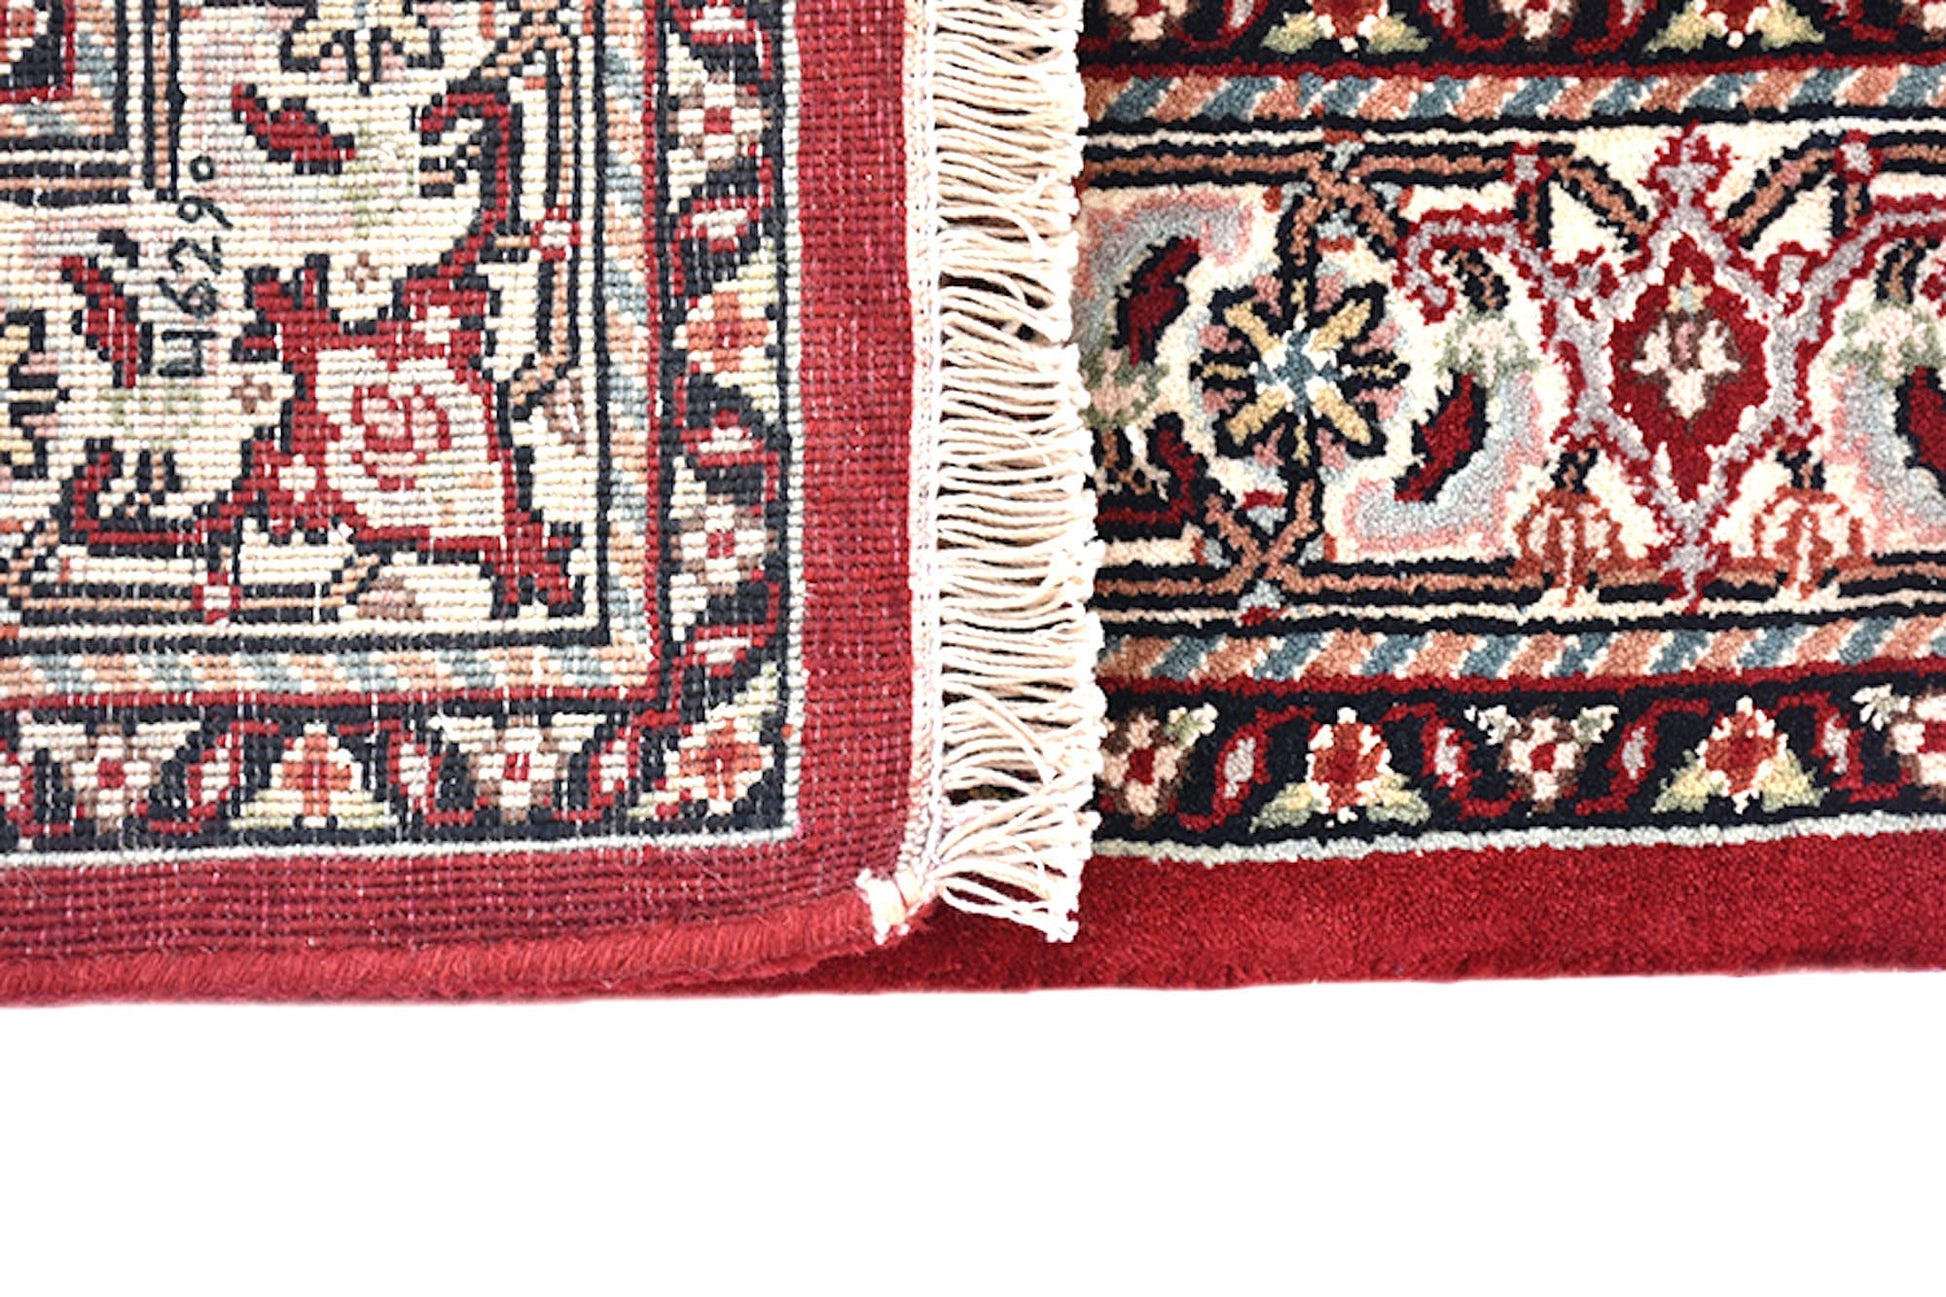 Dark Colored Antique Oriental Rug | Small Kitchen Floor Rug | Dark Red & Pink | Traditional Floral Area Rug Handmade with Wool